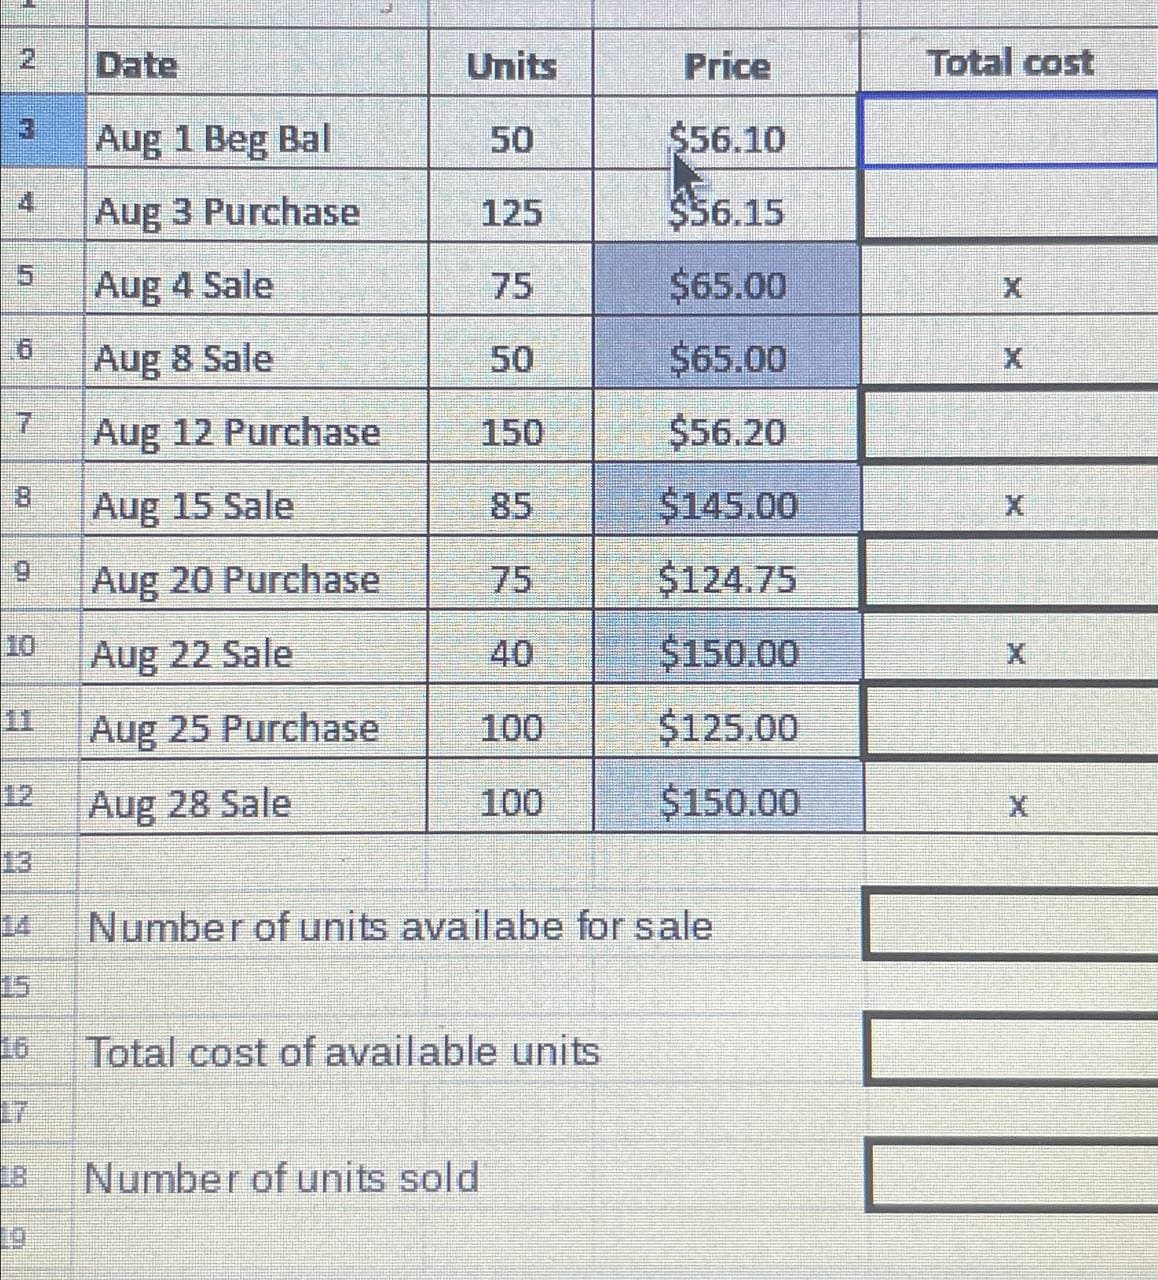 6
14 Number of units availabe for sale
ST
Total cost of available units
Number of units sold
ET
N
Date
Units
Price
Total cost
Aug 1 Beg Bal
50
$56.10
Aug 3 Purchase
125
$56.15
5
Aug 4 Sale
75
$65.00
X
6
Aug 8 Sale
50
$65.00
X
7
Aug 12 Purchase
150
$56.20
8
Aug 15 Sale
85
$145.00
X
9
Aug 20 Purchase
75
$124.75
10
Aug 22 Sale
40
$150.00
X
11 Aug 25 Purchase
100
$125.00
12
Aug 28 Sale
100
$150.00
X